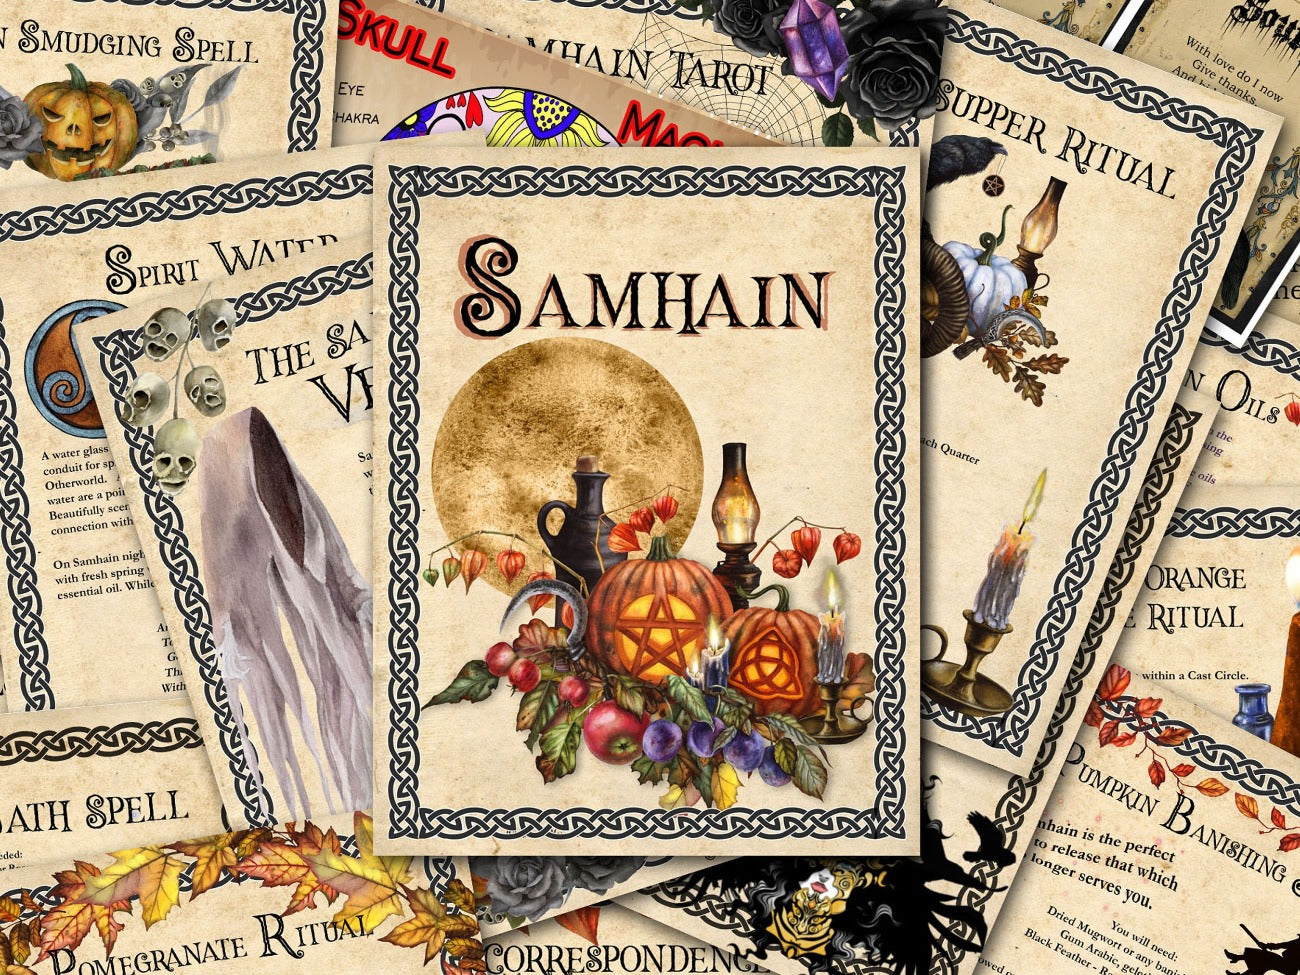 Samhain Bundle Pages, Wicca Witch Seaonal Celebrations, Baby Witch, Wheel of the Year, Sabbat Grimoire, Sabbat Traditions - Morgana Magick Spell